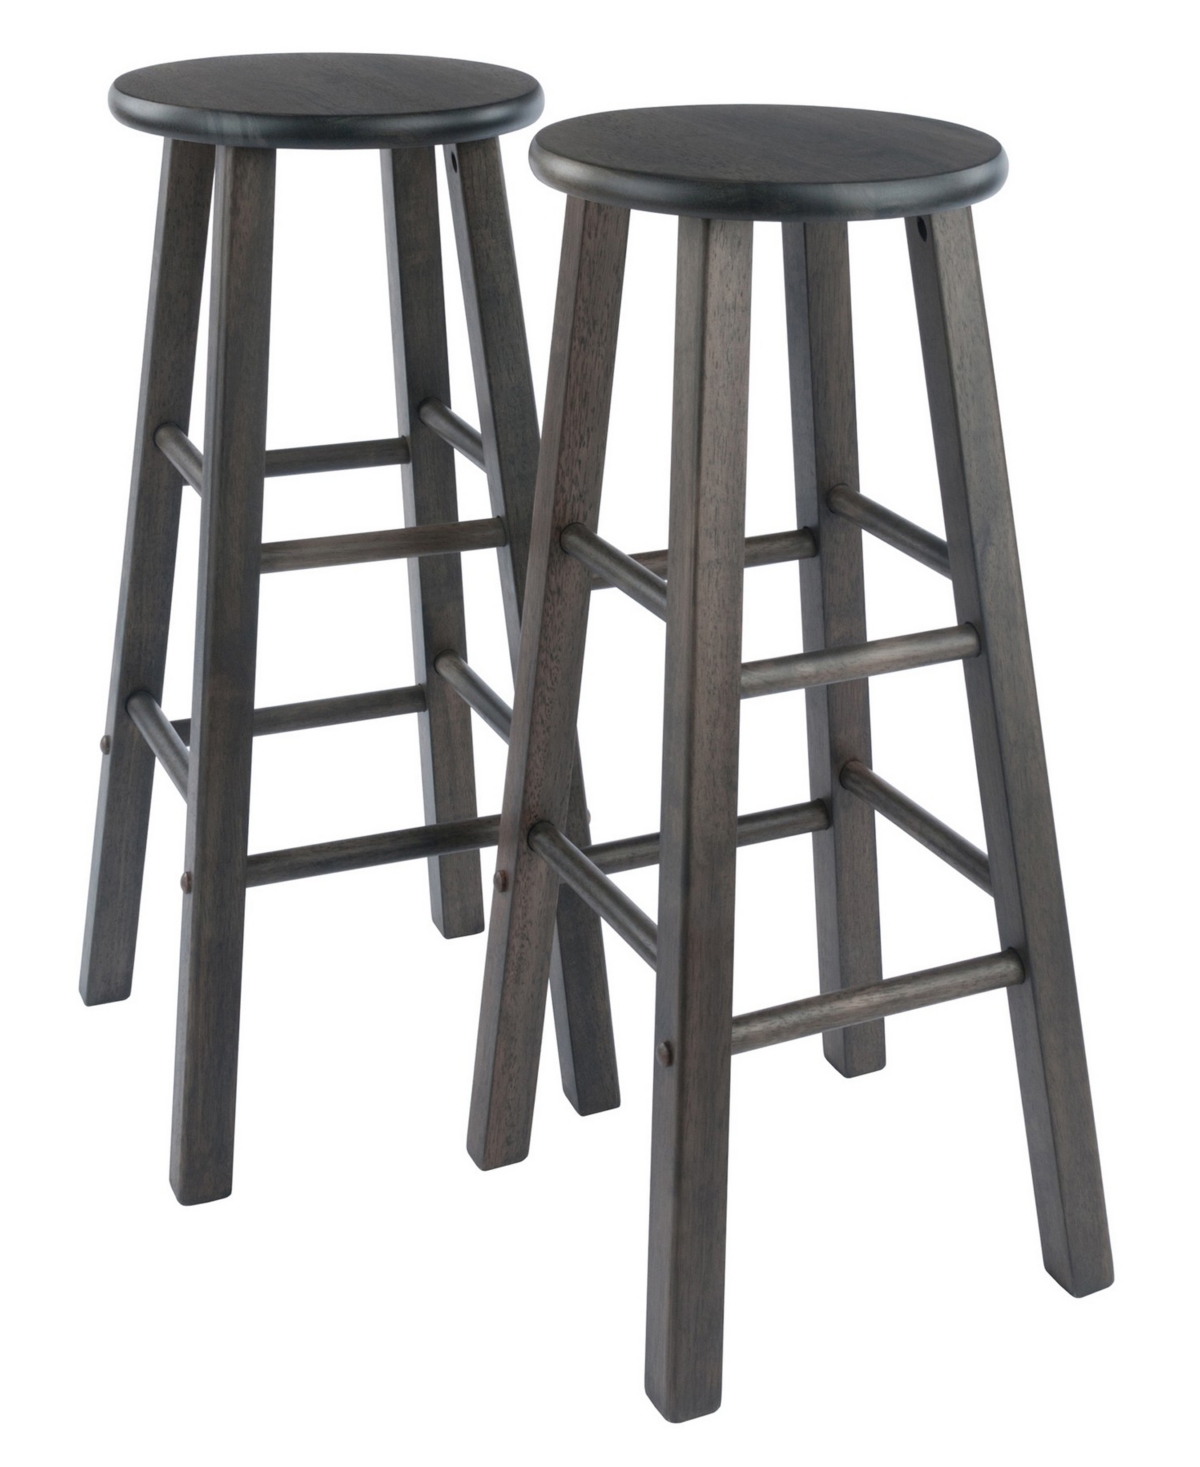 Winsome Element 29.98" 2-piece Wood Bar Stool Set In Oyster Gray